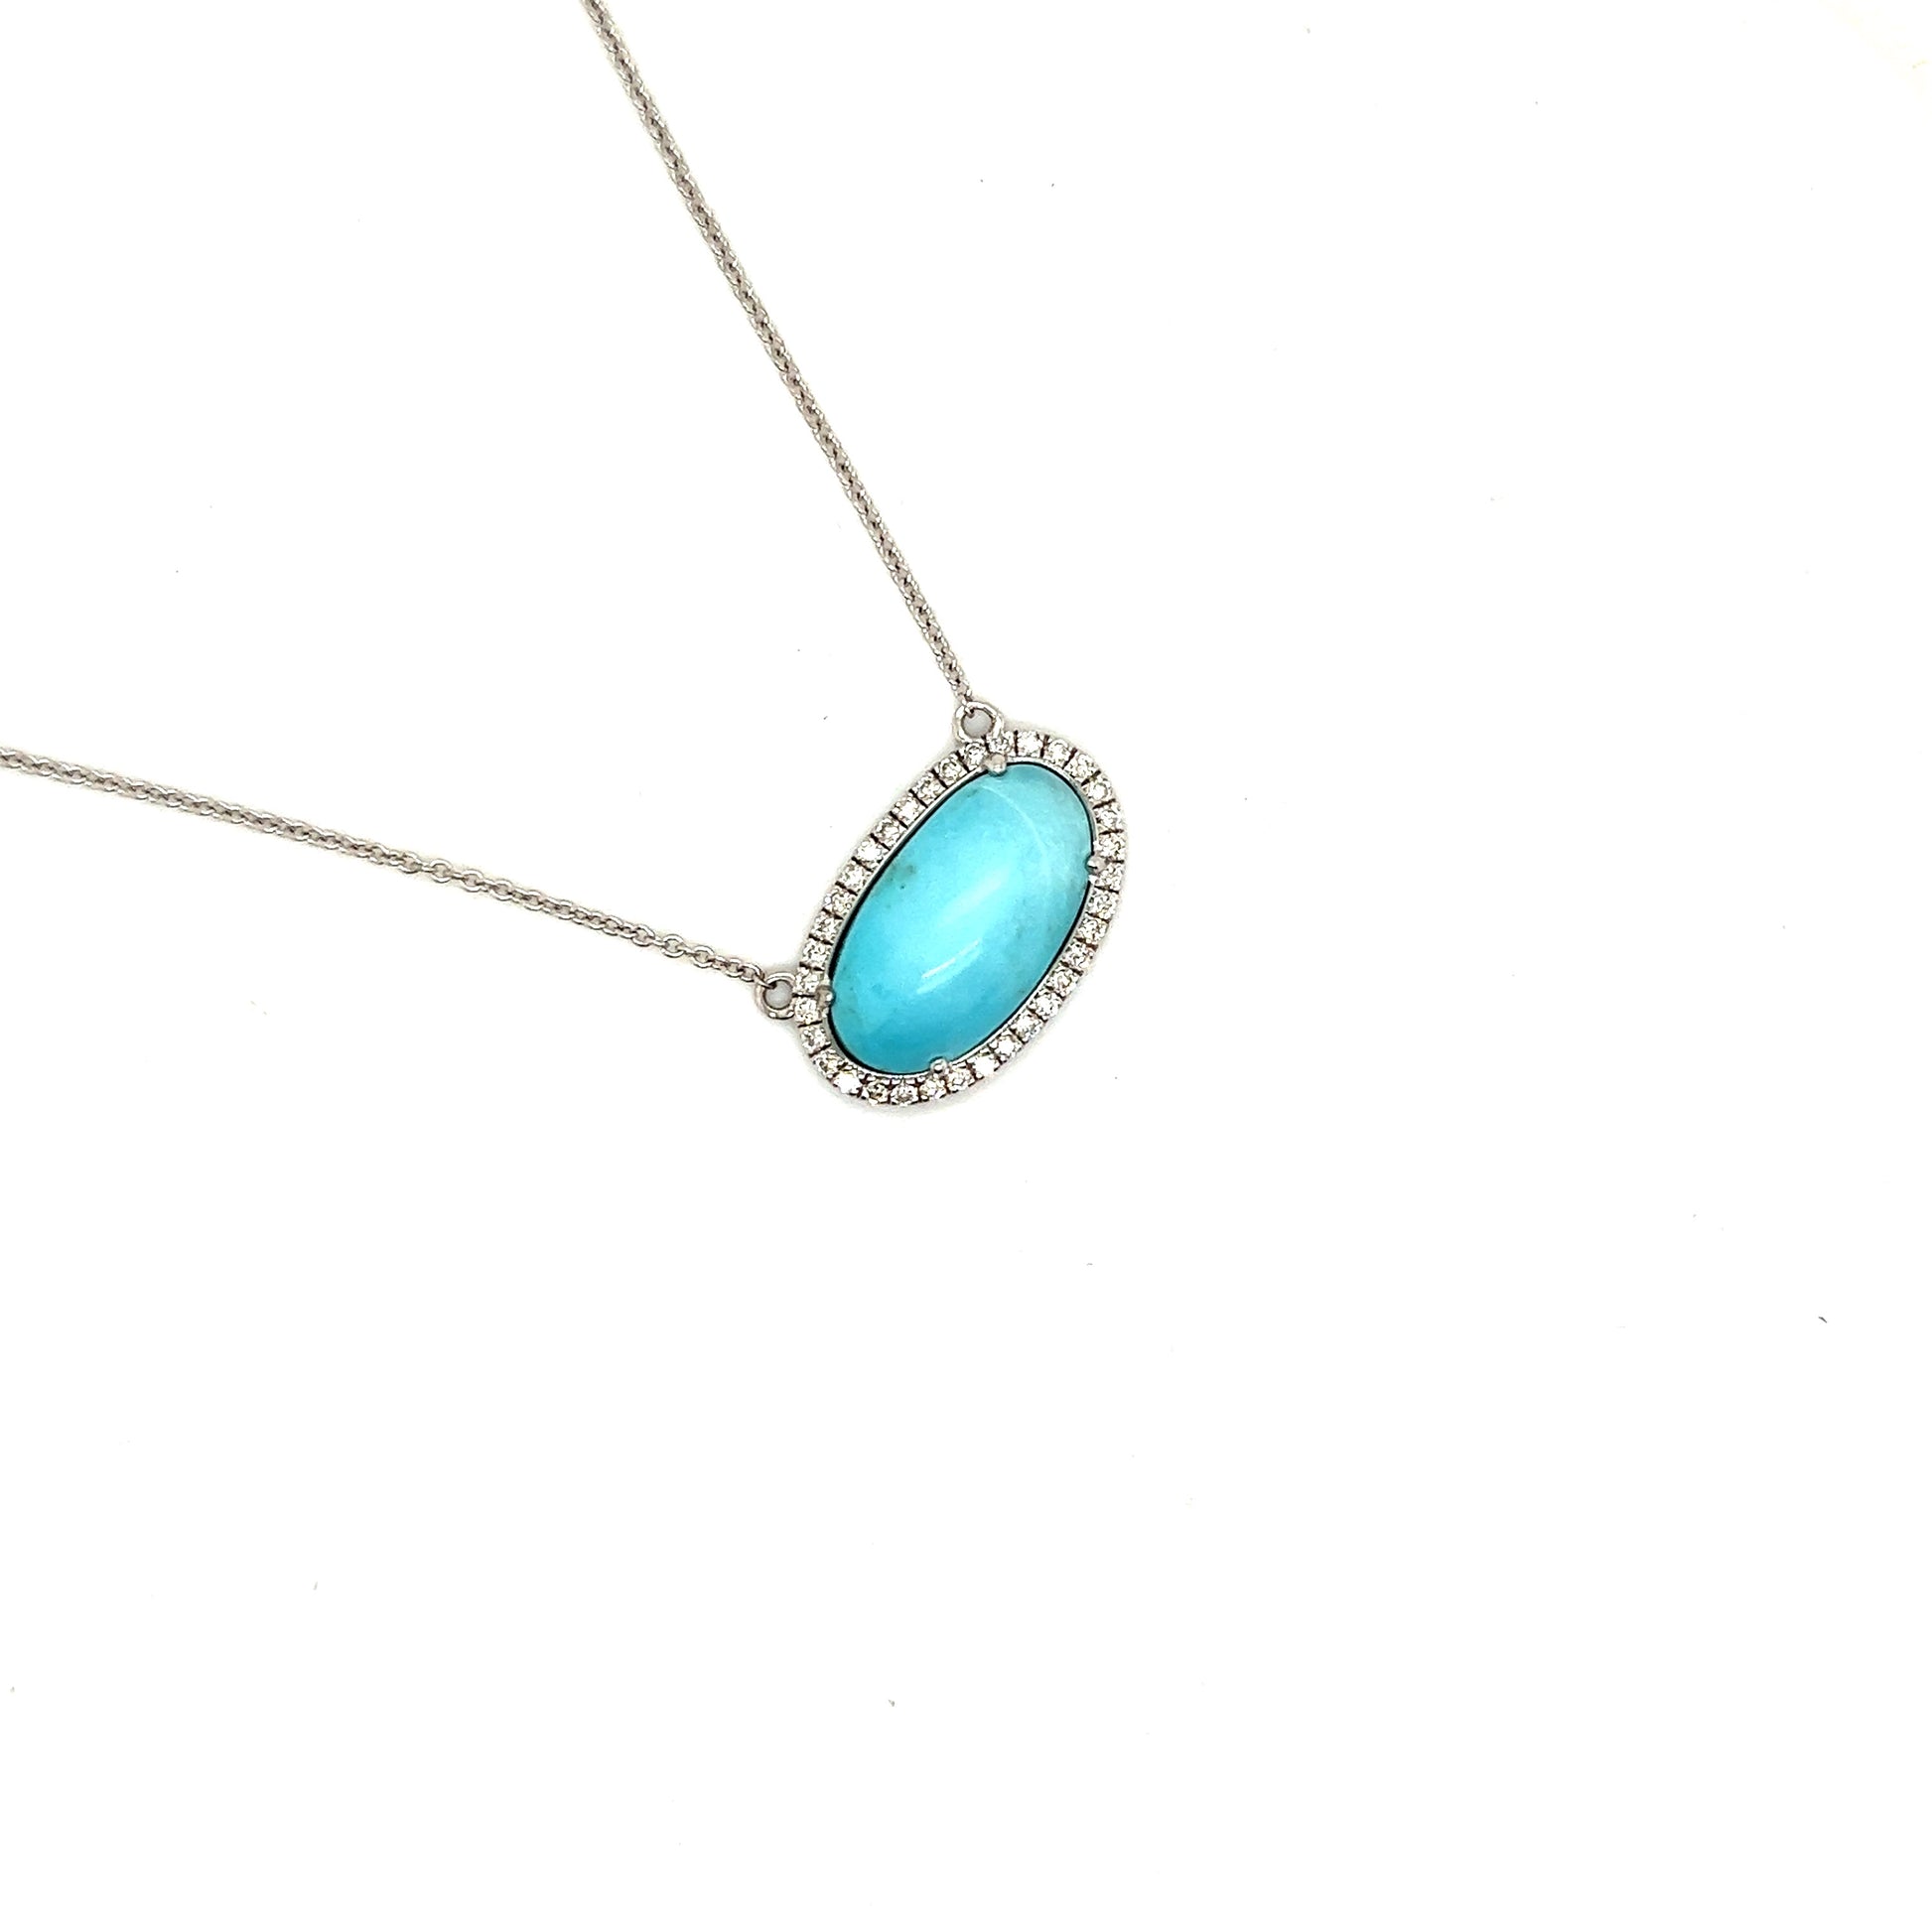 Natural Persian Turquoise Diamond Halo Pendant With Chain 18.5" 14k WG 8.1 TCW Certified $4,975 300679